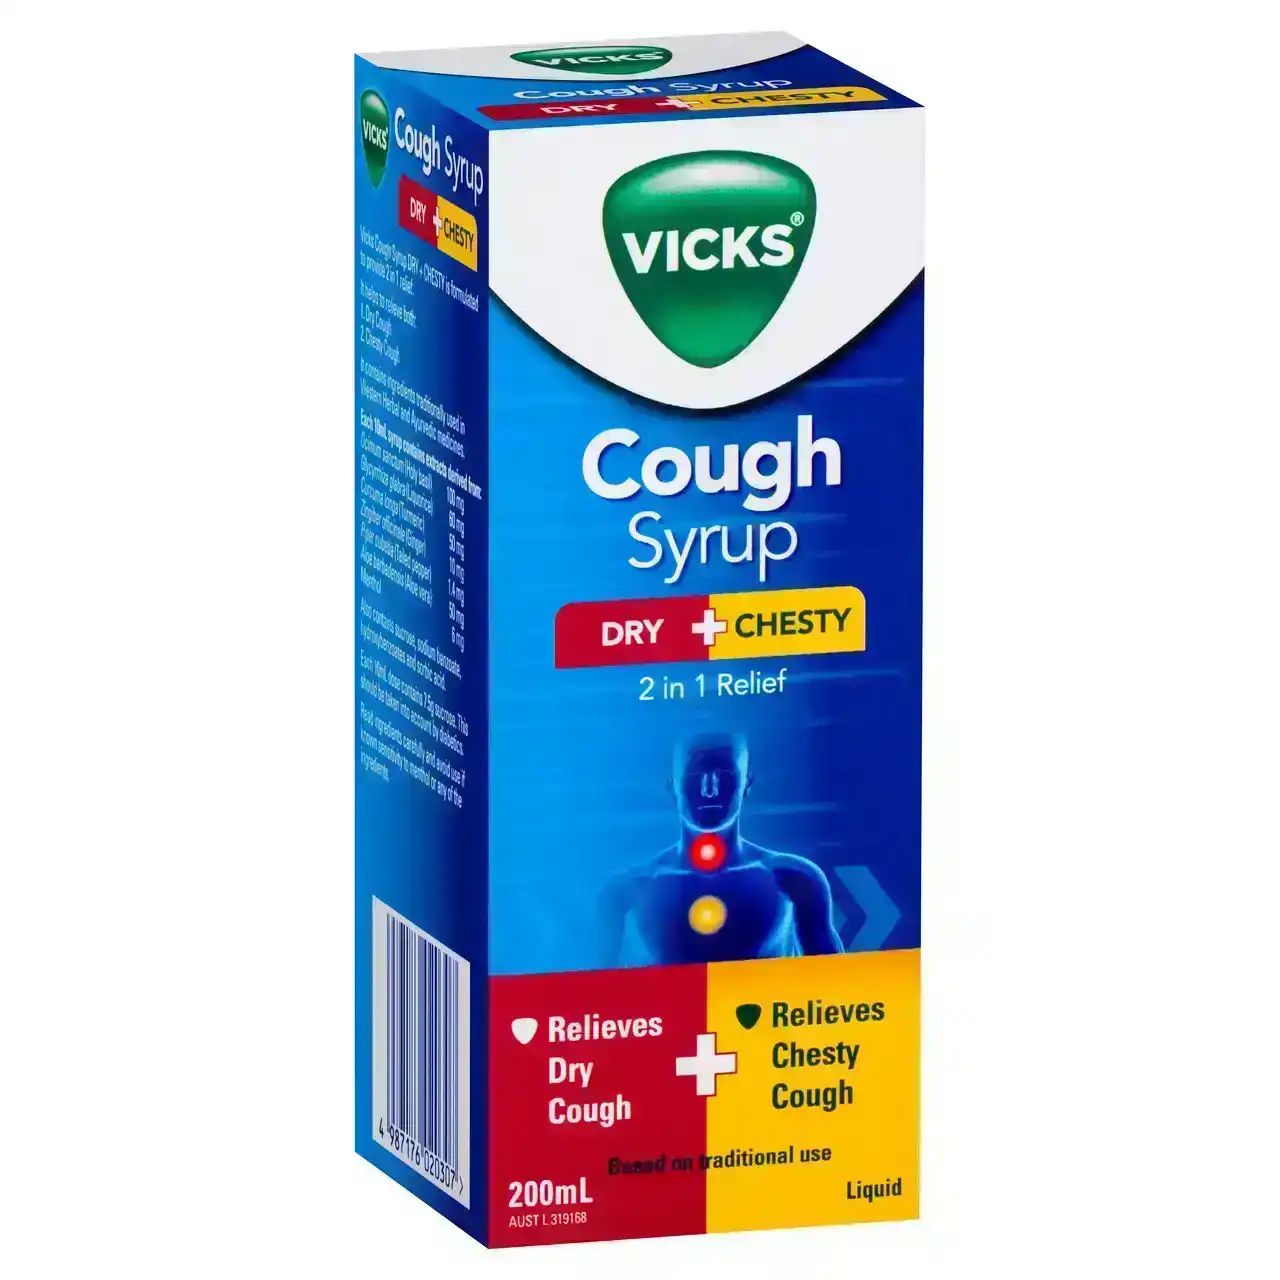 Vicks Cough Syrup Dry + Chesty 200mL